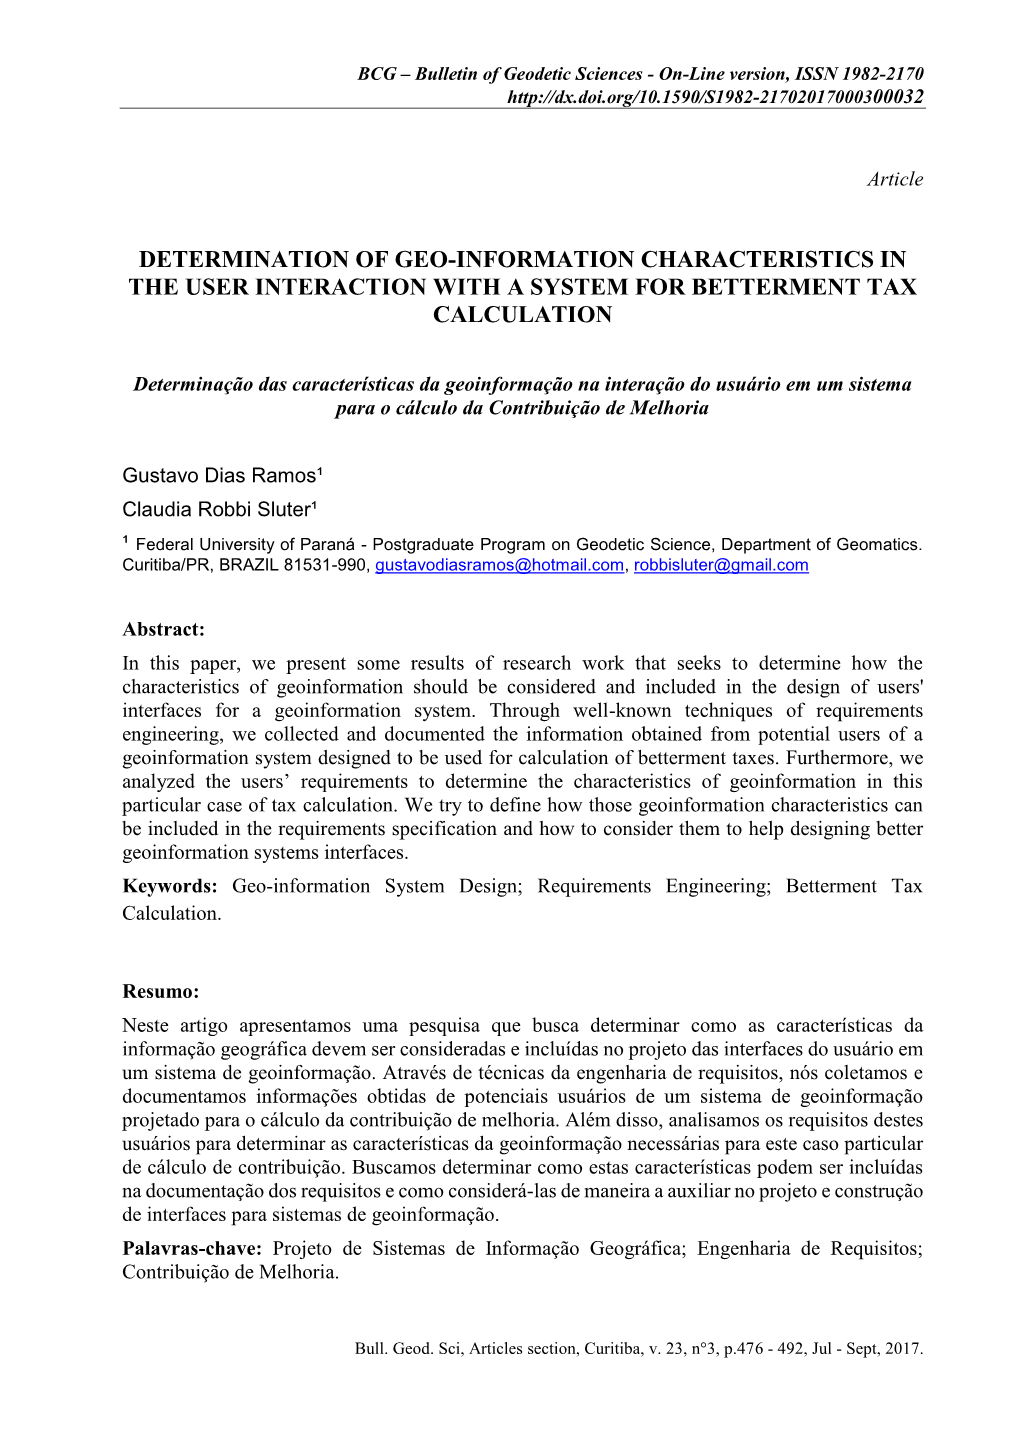 Determination of Geo-Information Characteristics in the User Interaction with a System for Betterment Tax Calculation